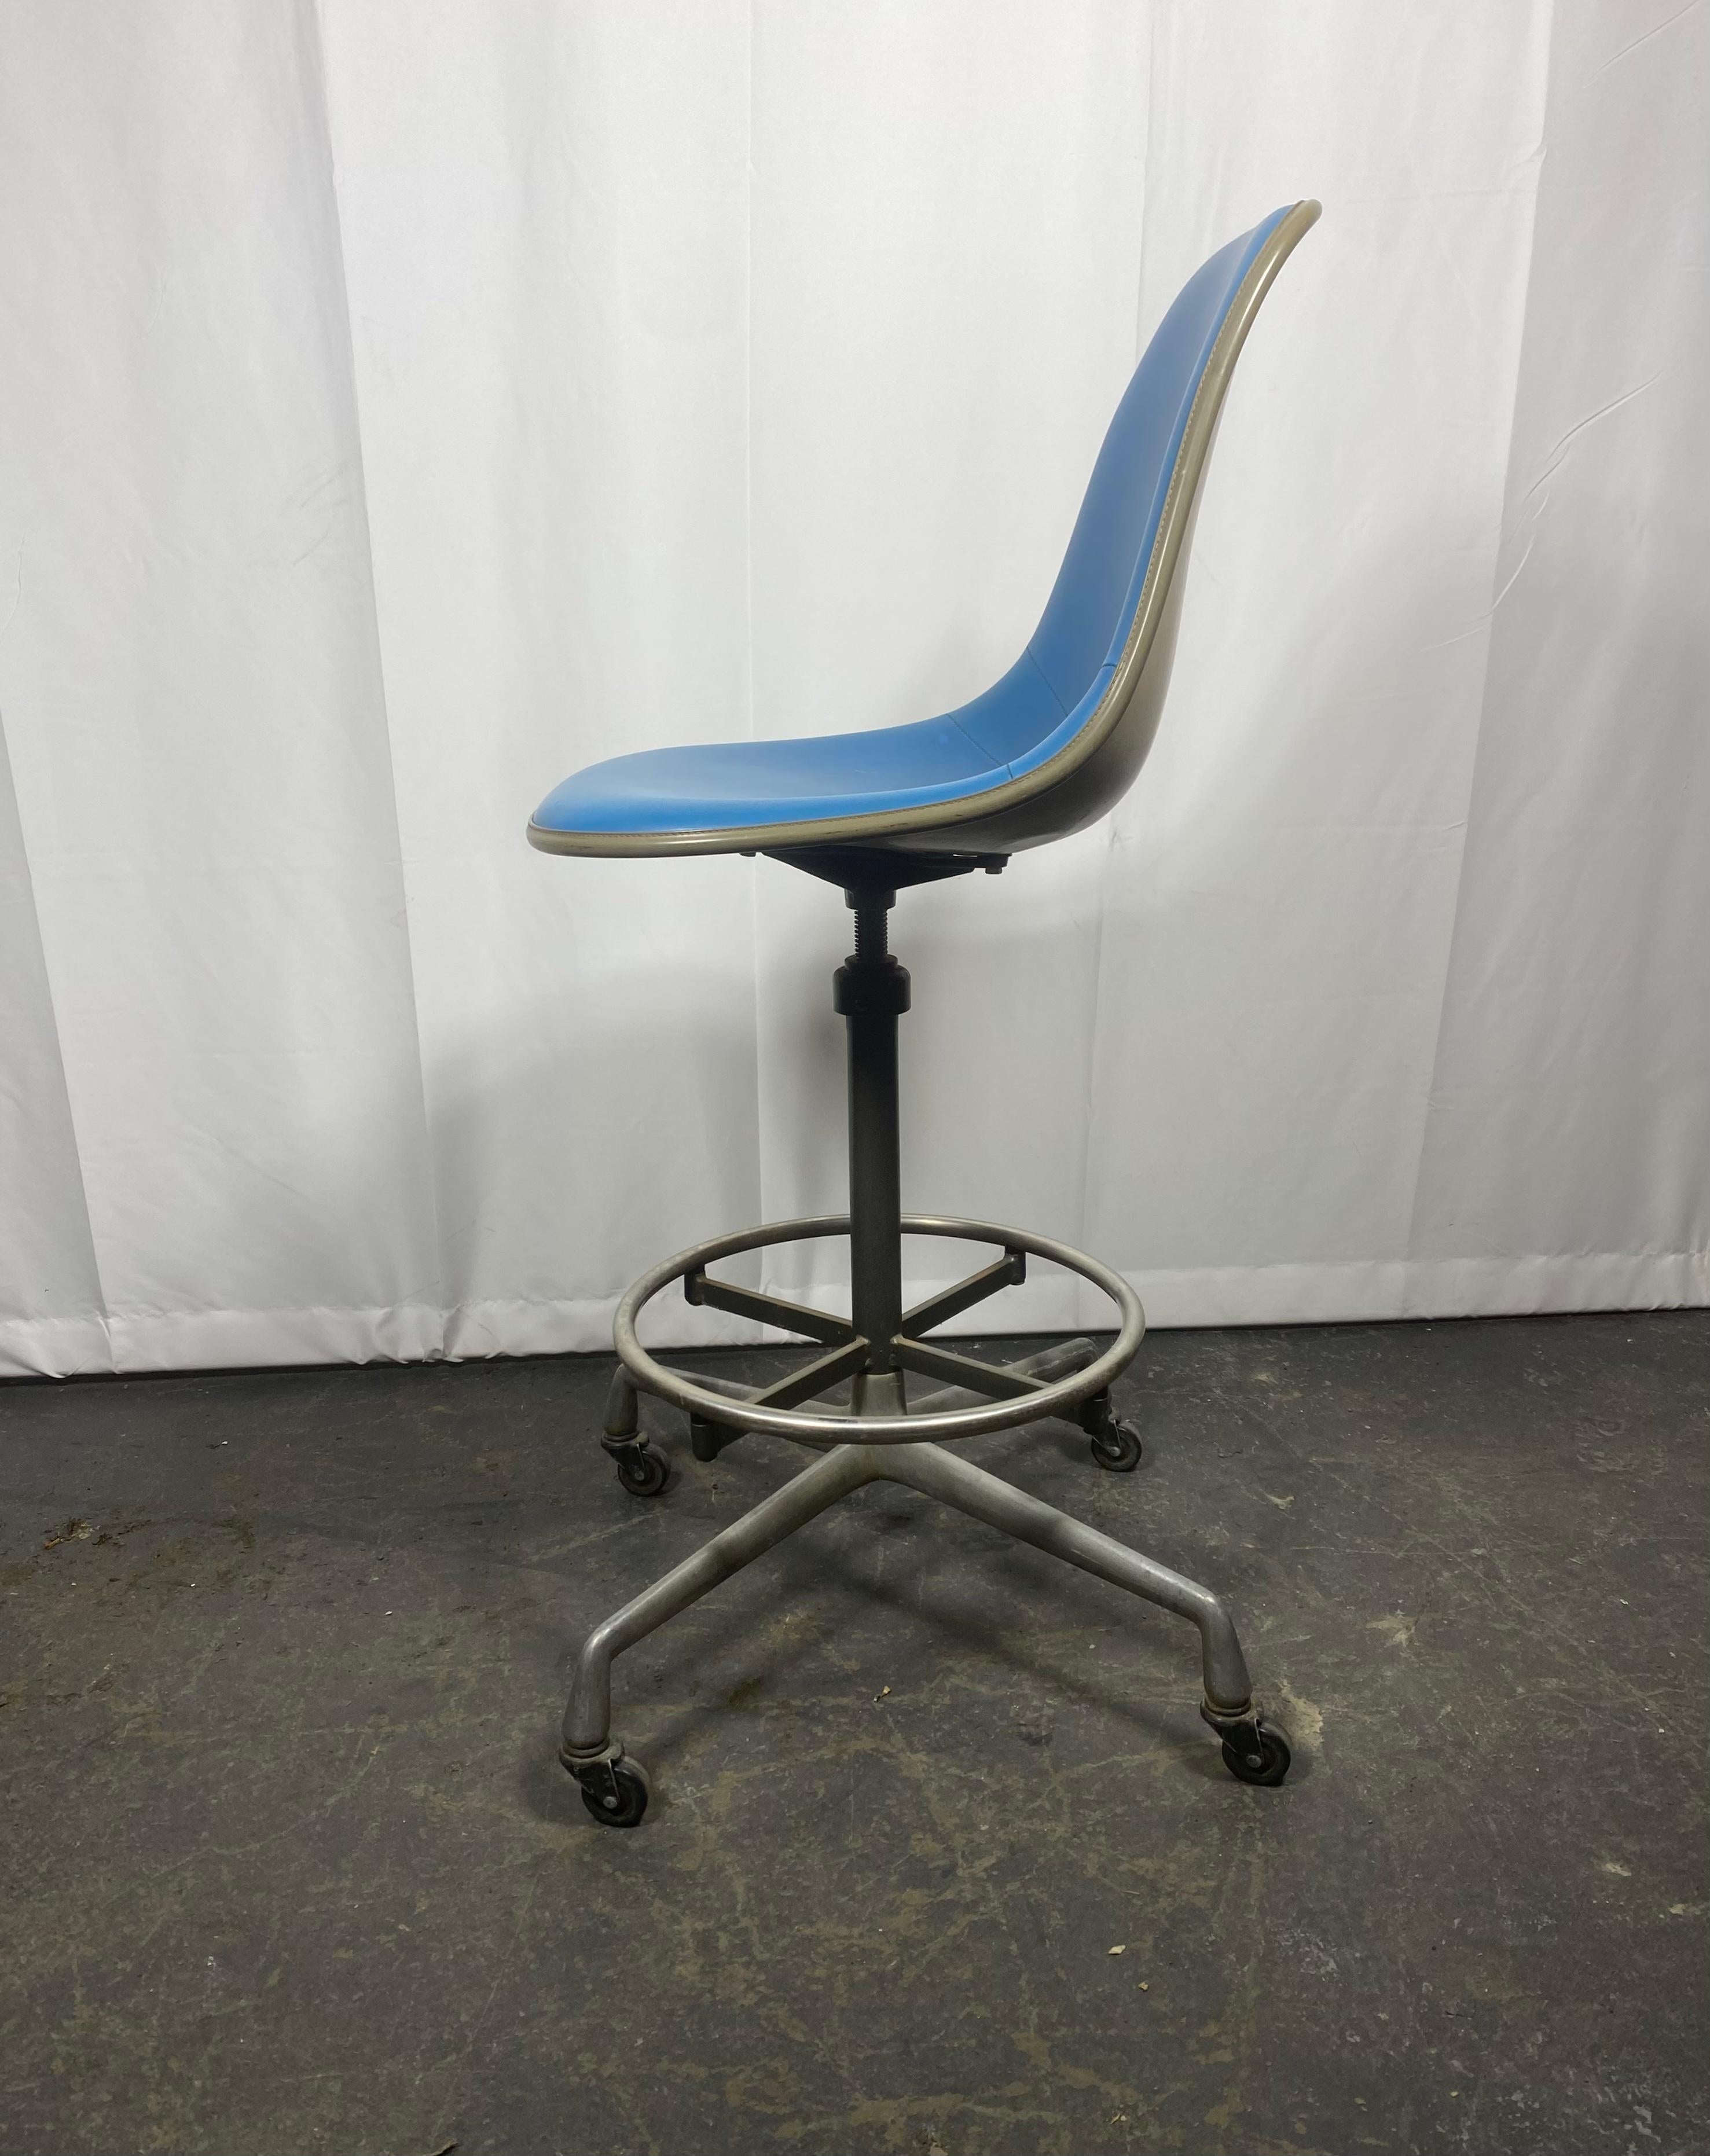 Charles and Ray Eames Drafting Stool for Herman Miller , on castors. c.1974 ,, Stunning baby blue padded shell in amazing original conditioin. Perfect for home or office,, Classic modernist design..Retains original label,, Adjustable height, 